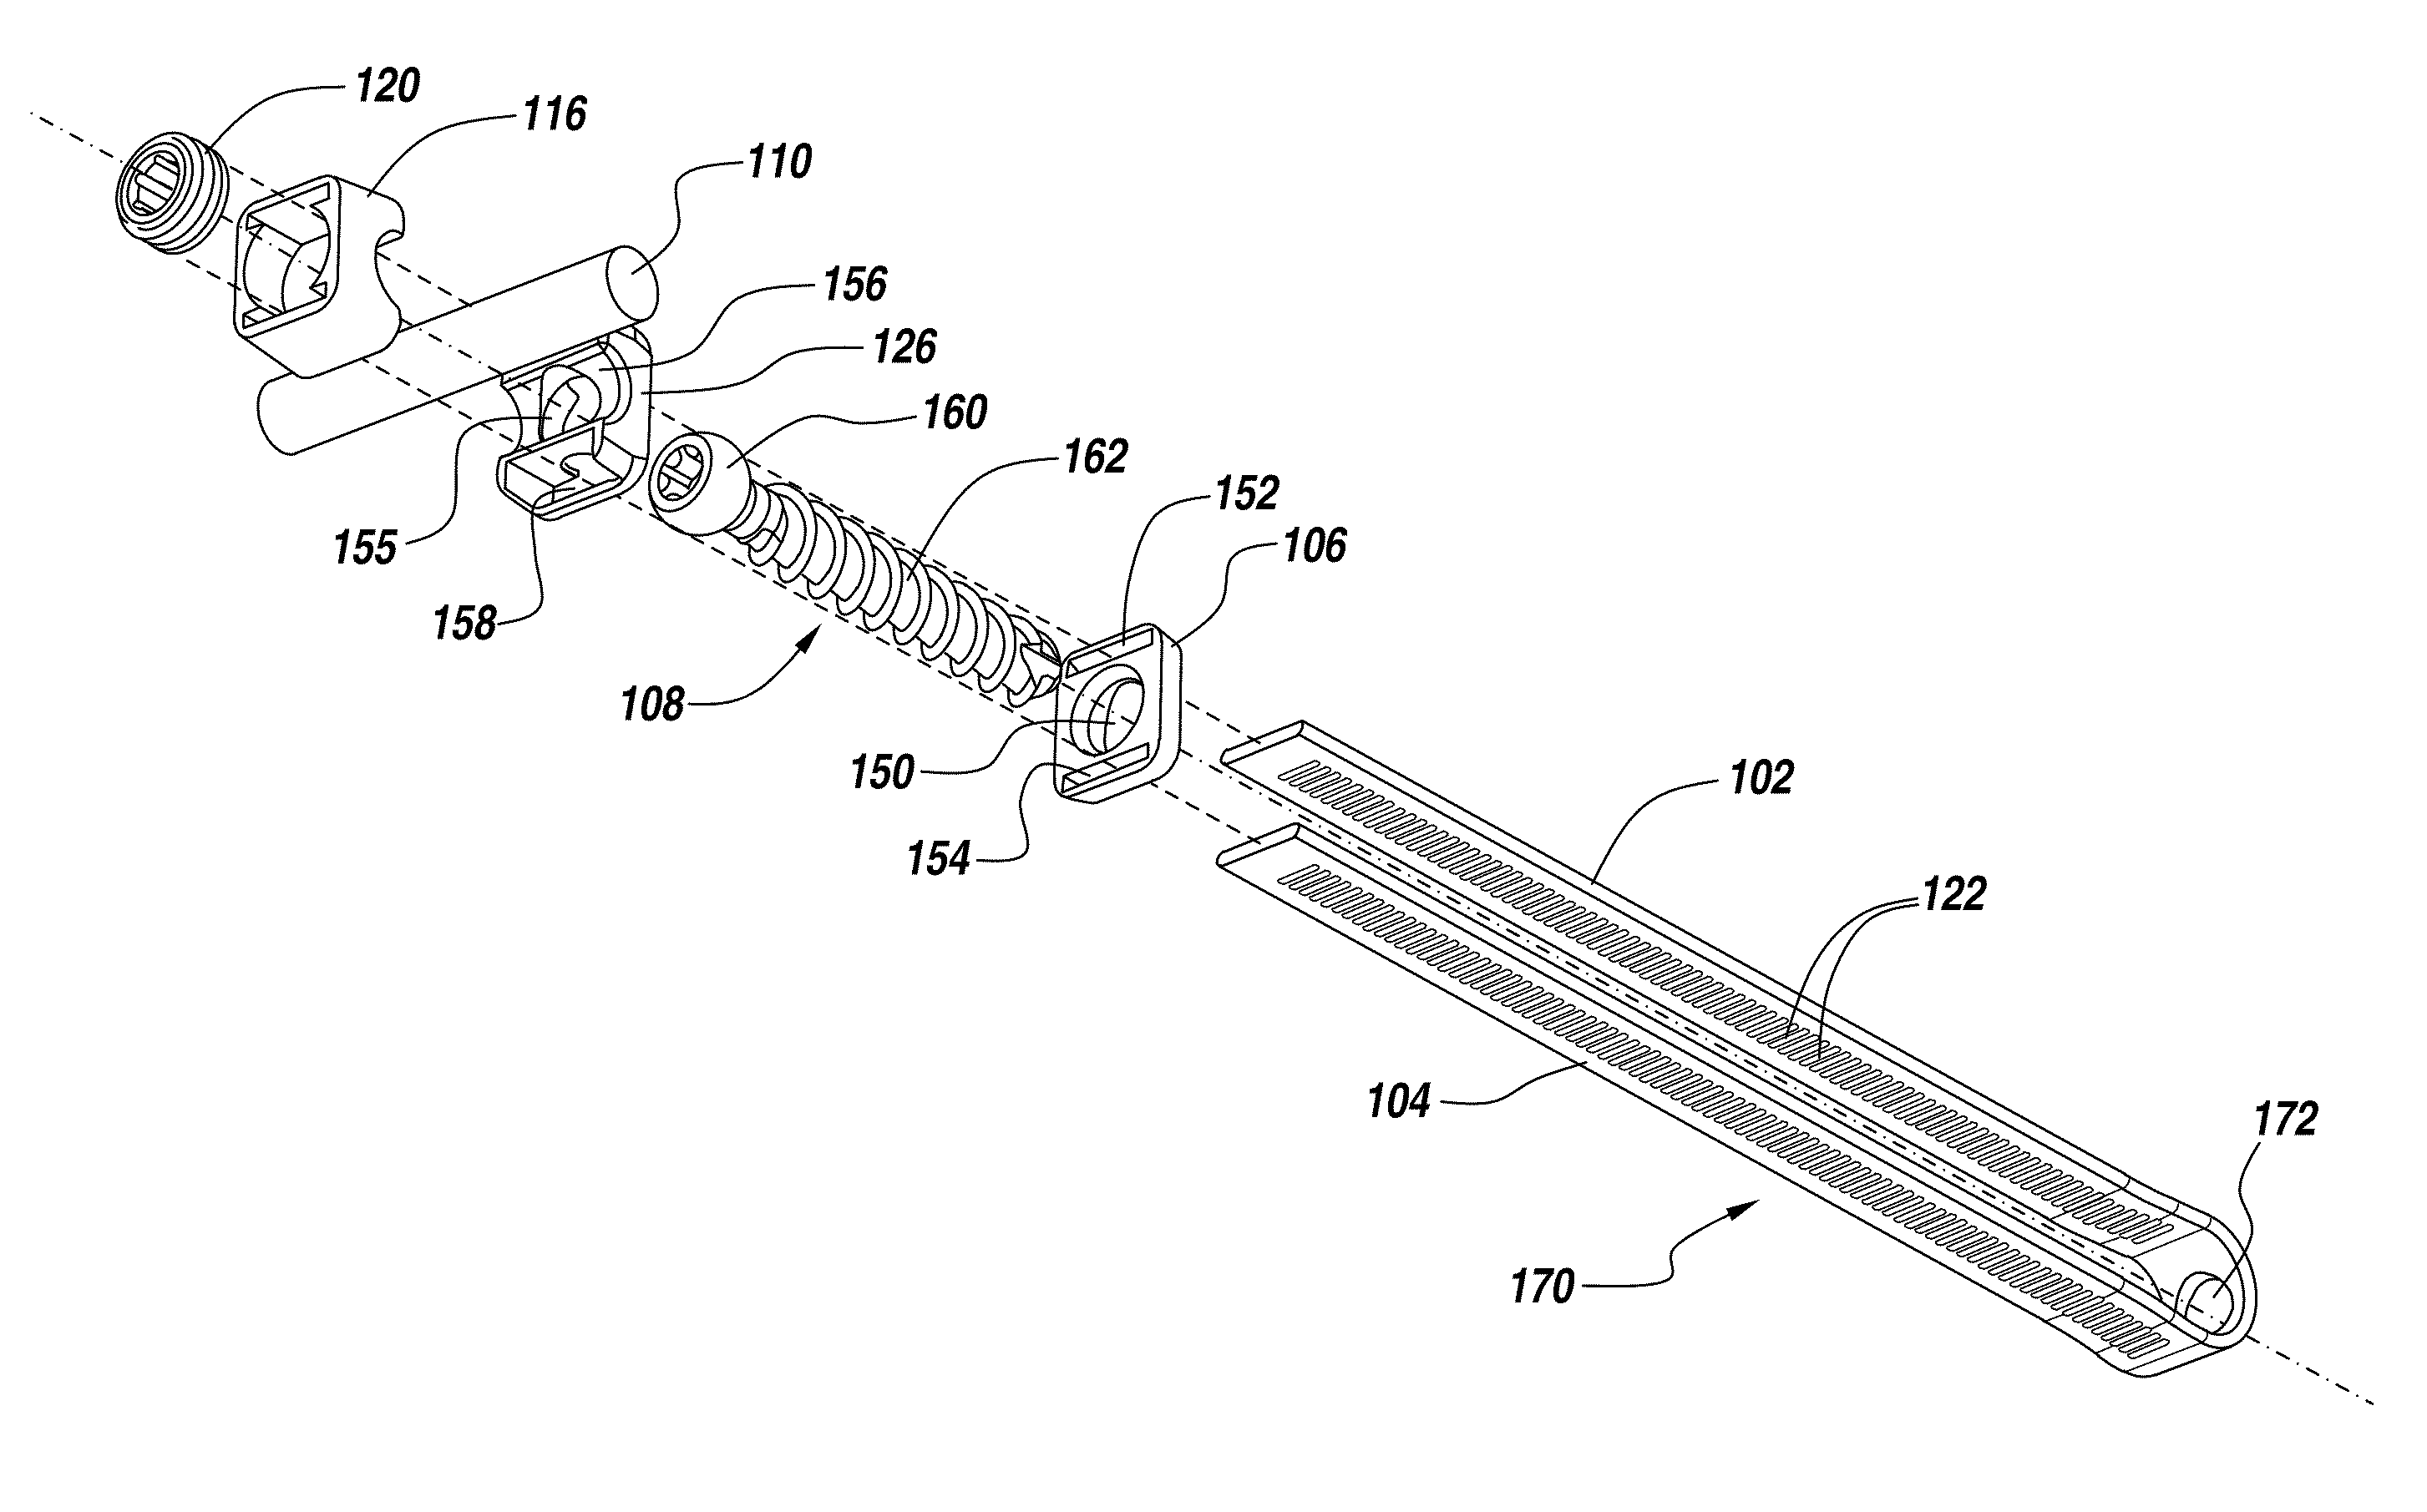 Spinal implant with a flexible extension element